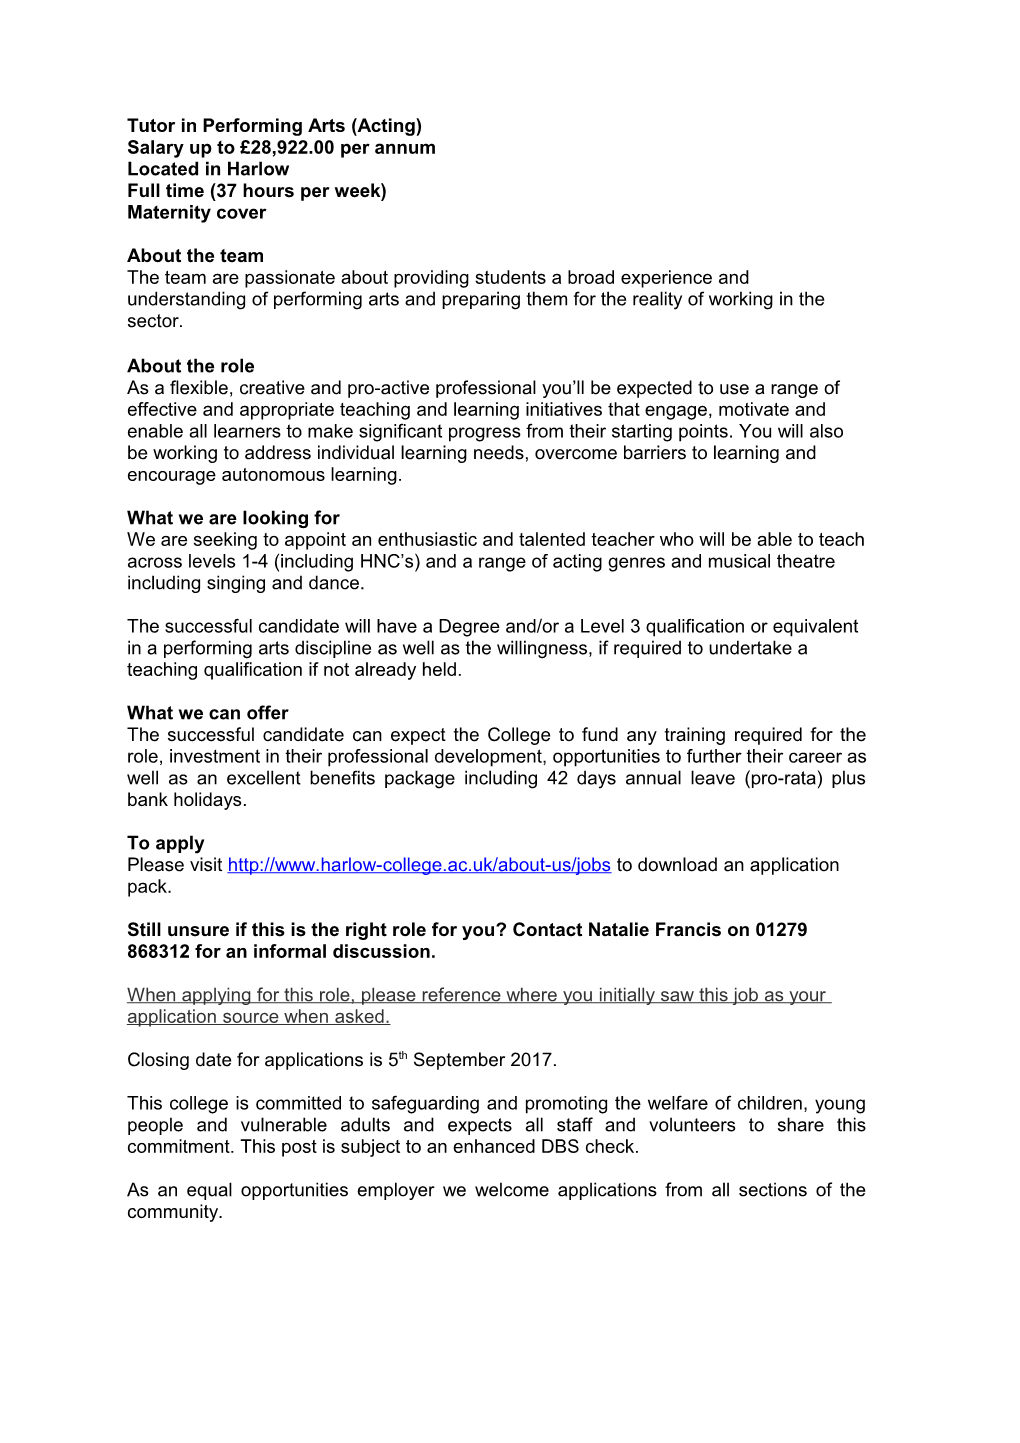 Harlow College Is Seeking to Appoint the Following Staff